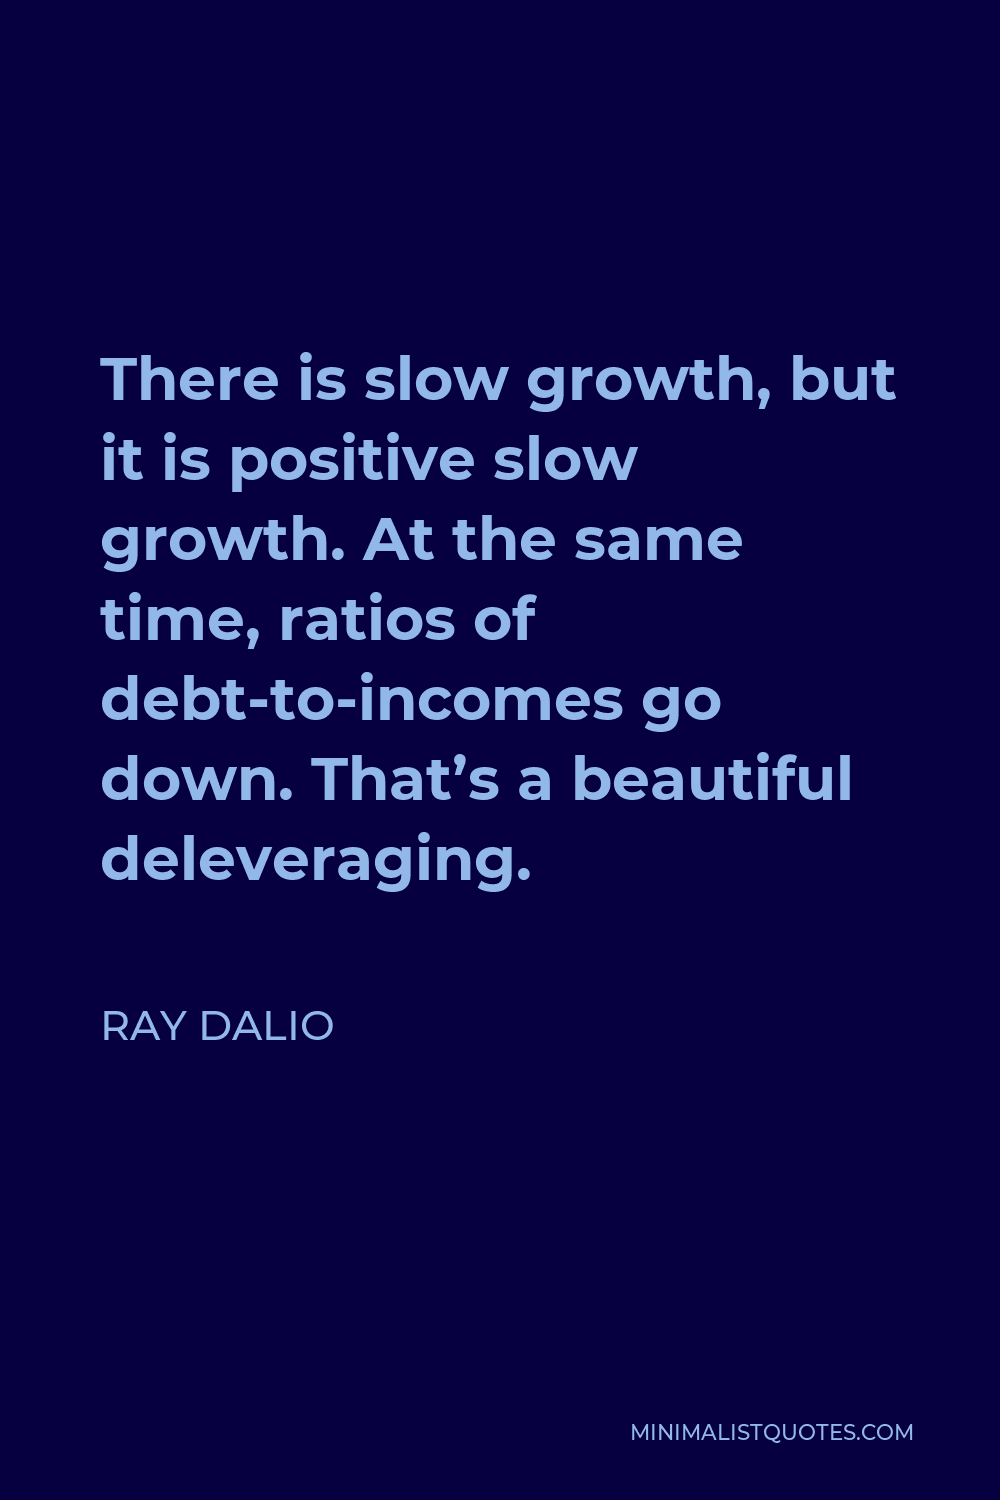 Ray Dalio Quote - There is slow growth, but it is positive slow growth. At the same time, ratios of debt-to-incomes go down. That’s a beautiful deleveraging.